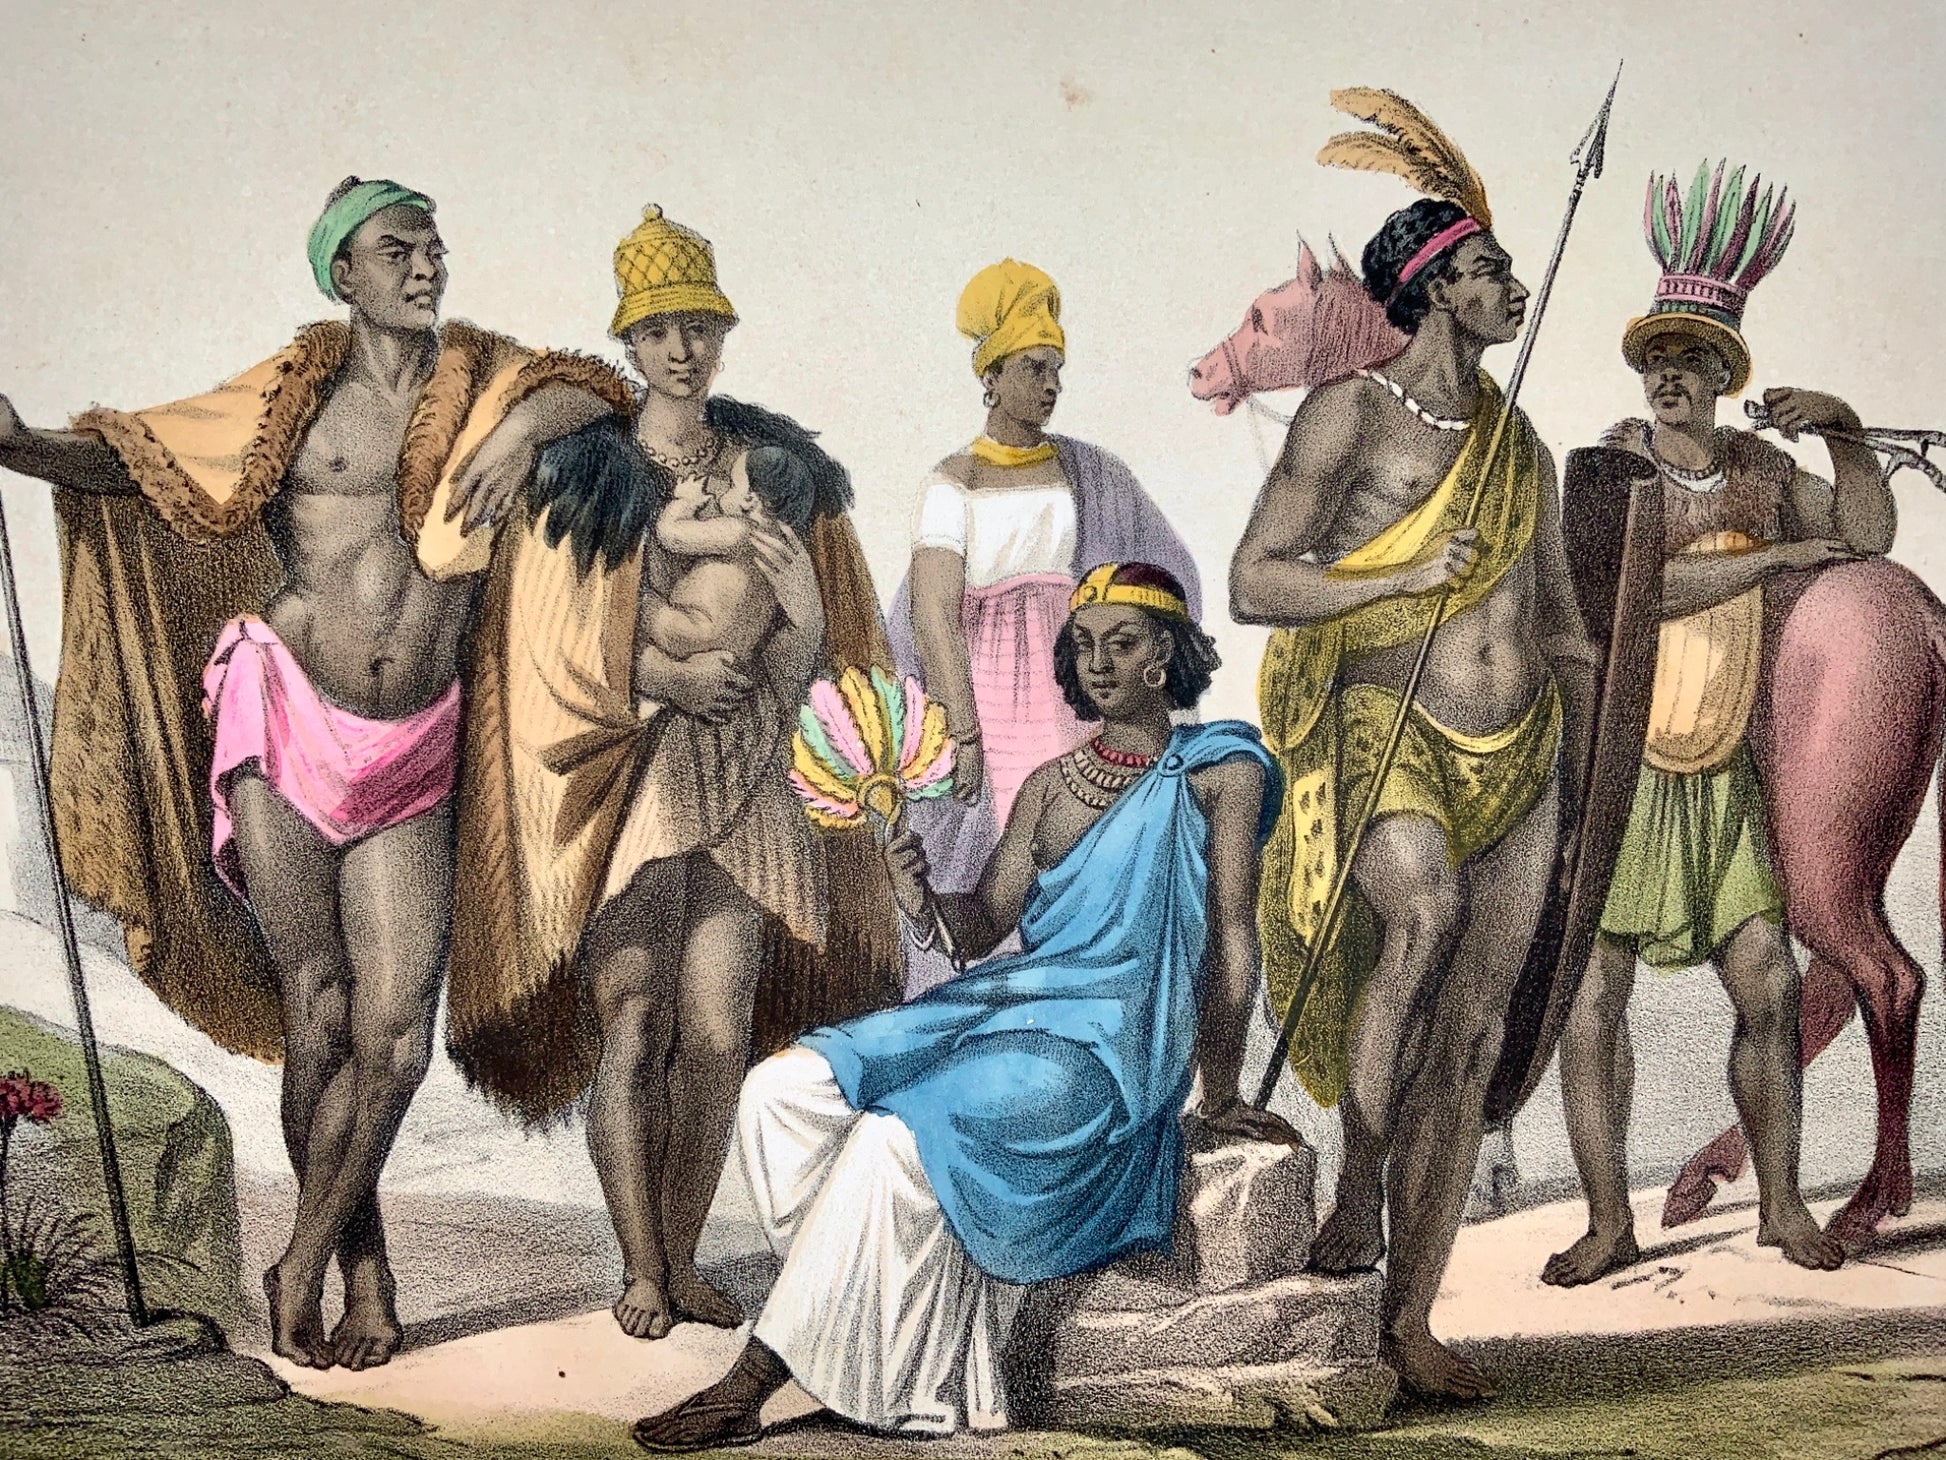 1860 c. Flossy, Bocquin; SOUTH AFRICAN NATIVES - Ethnology - hand coloured